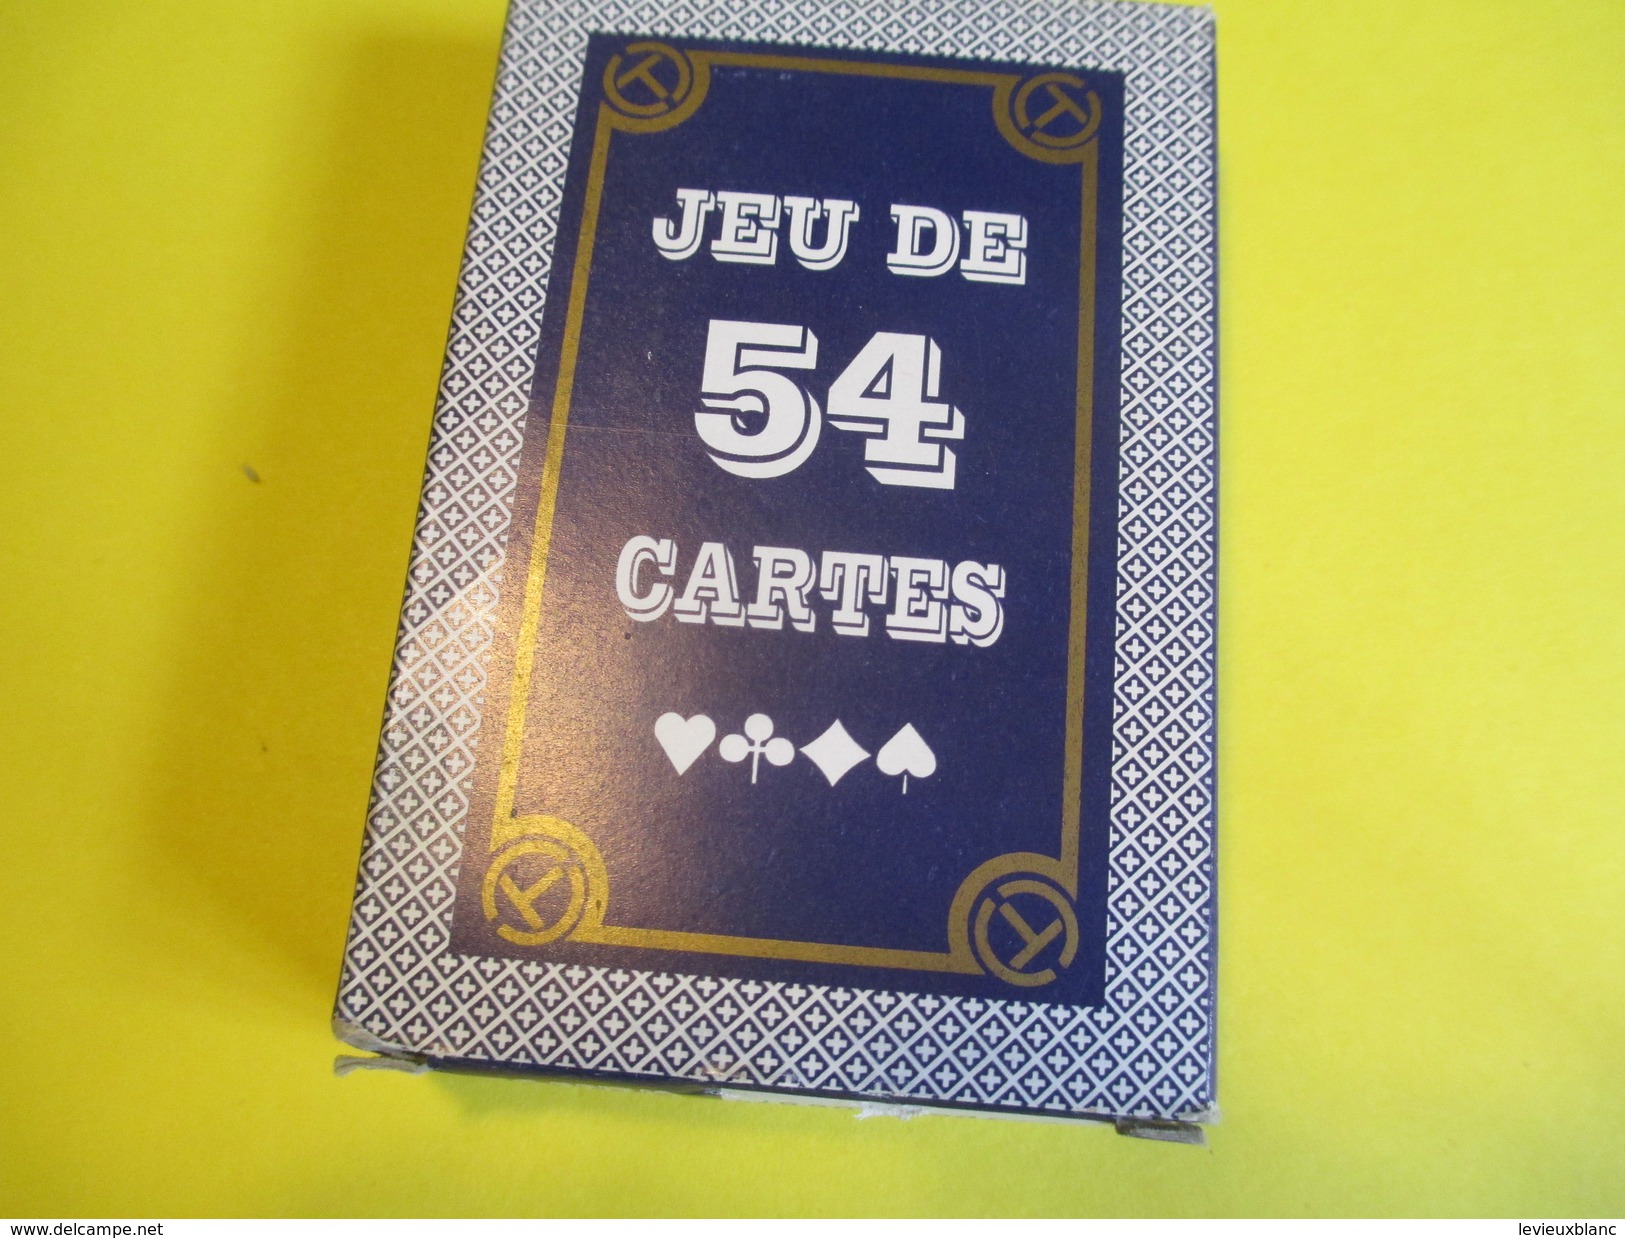 Jeux De 54 Cartes /Publicitaire/Cartes Glacées/ IBIS Accor Hotels / Made In CHINA/vers 2000        CAJ22 - Sonstige & Ohne Zuordnung